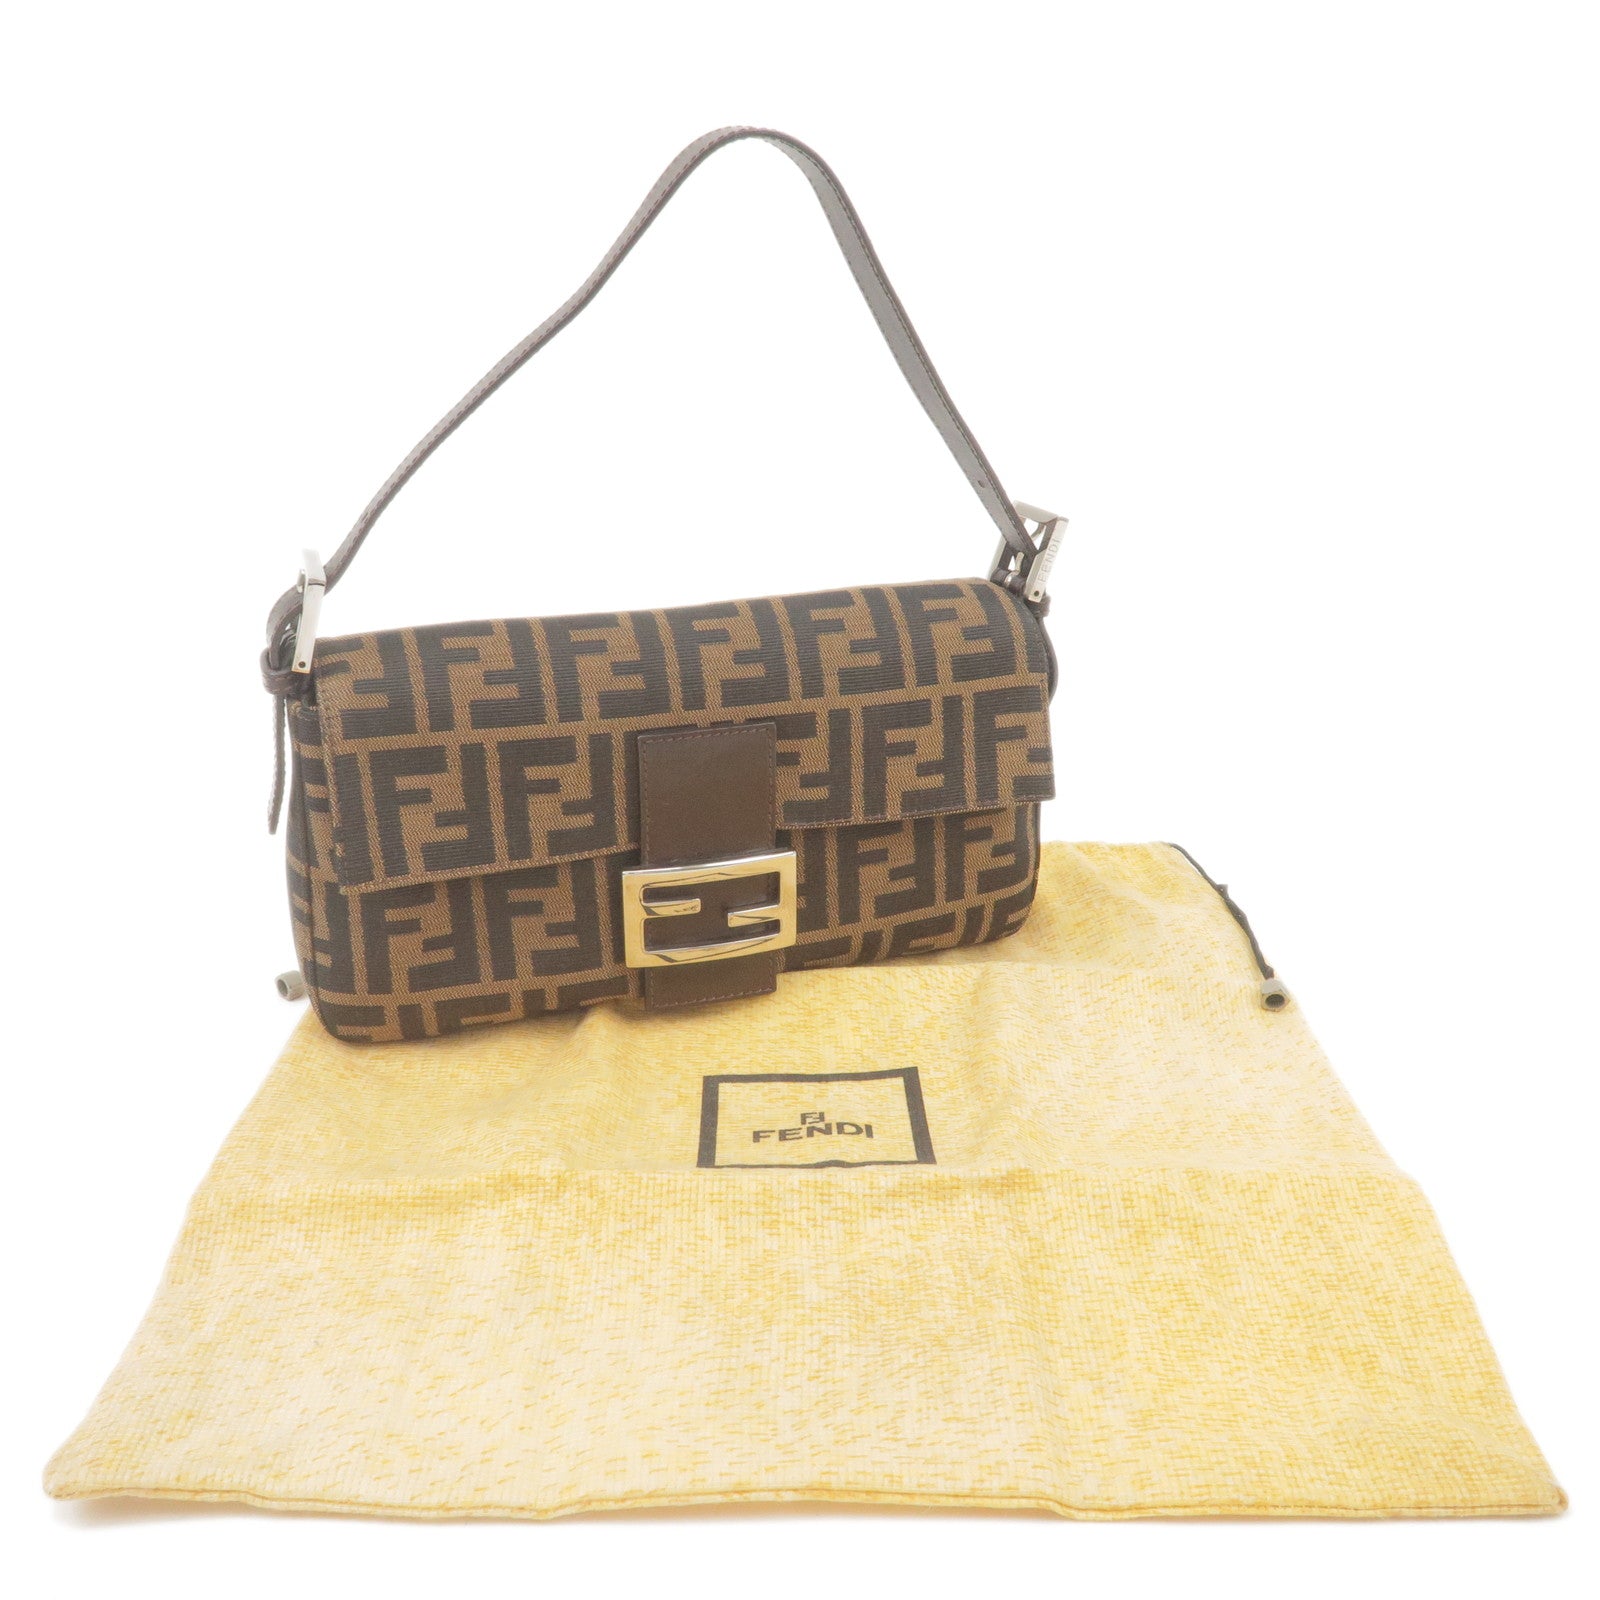 Fendi - Authenticated Baguette Handbag - Cloth Brown for Women, Very Good Condition